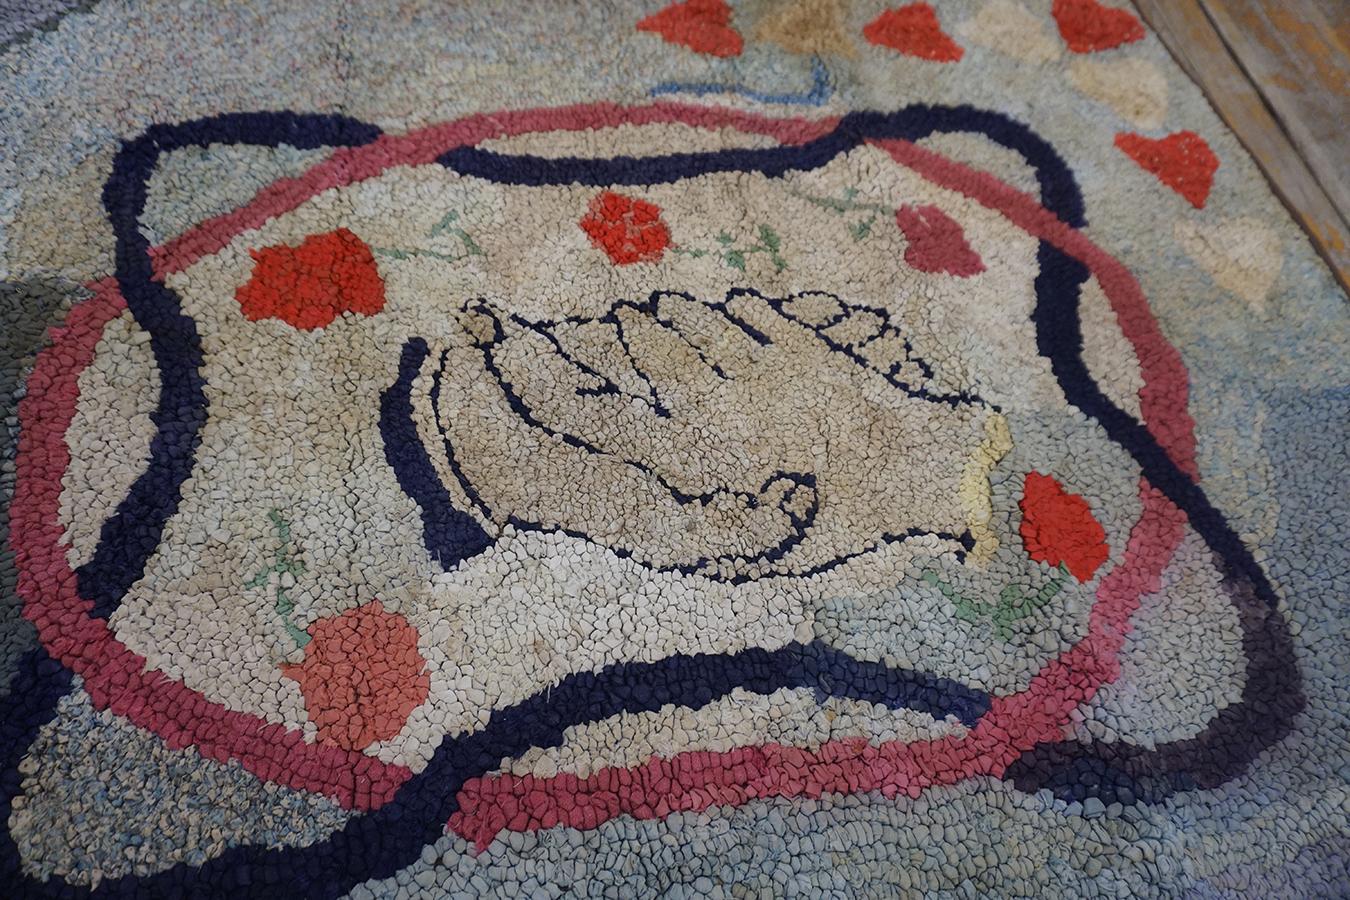 Hand-Woven Early 20th Century American Hooked Rug ( 2'9